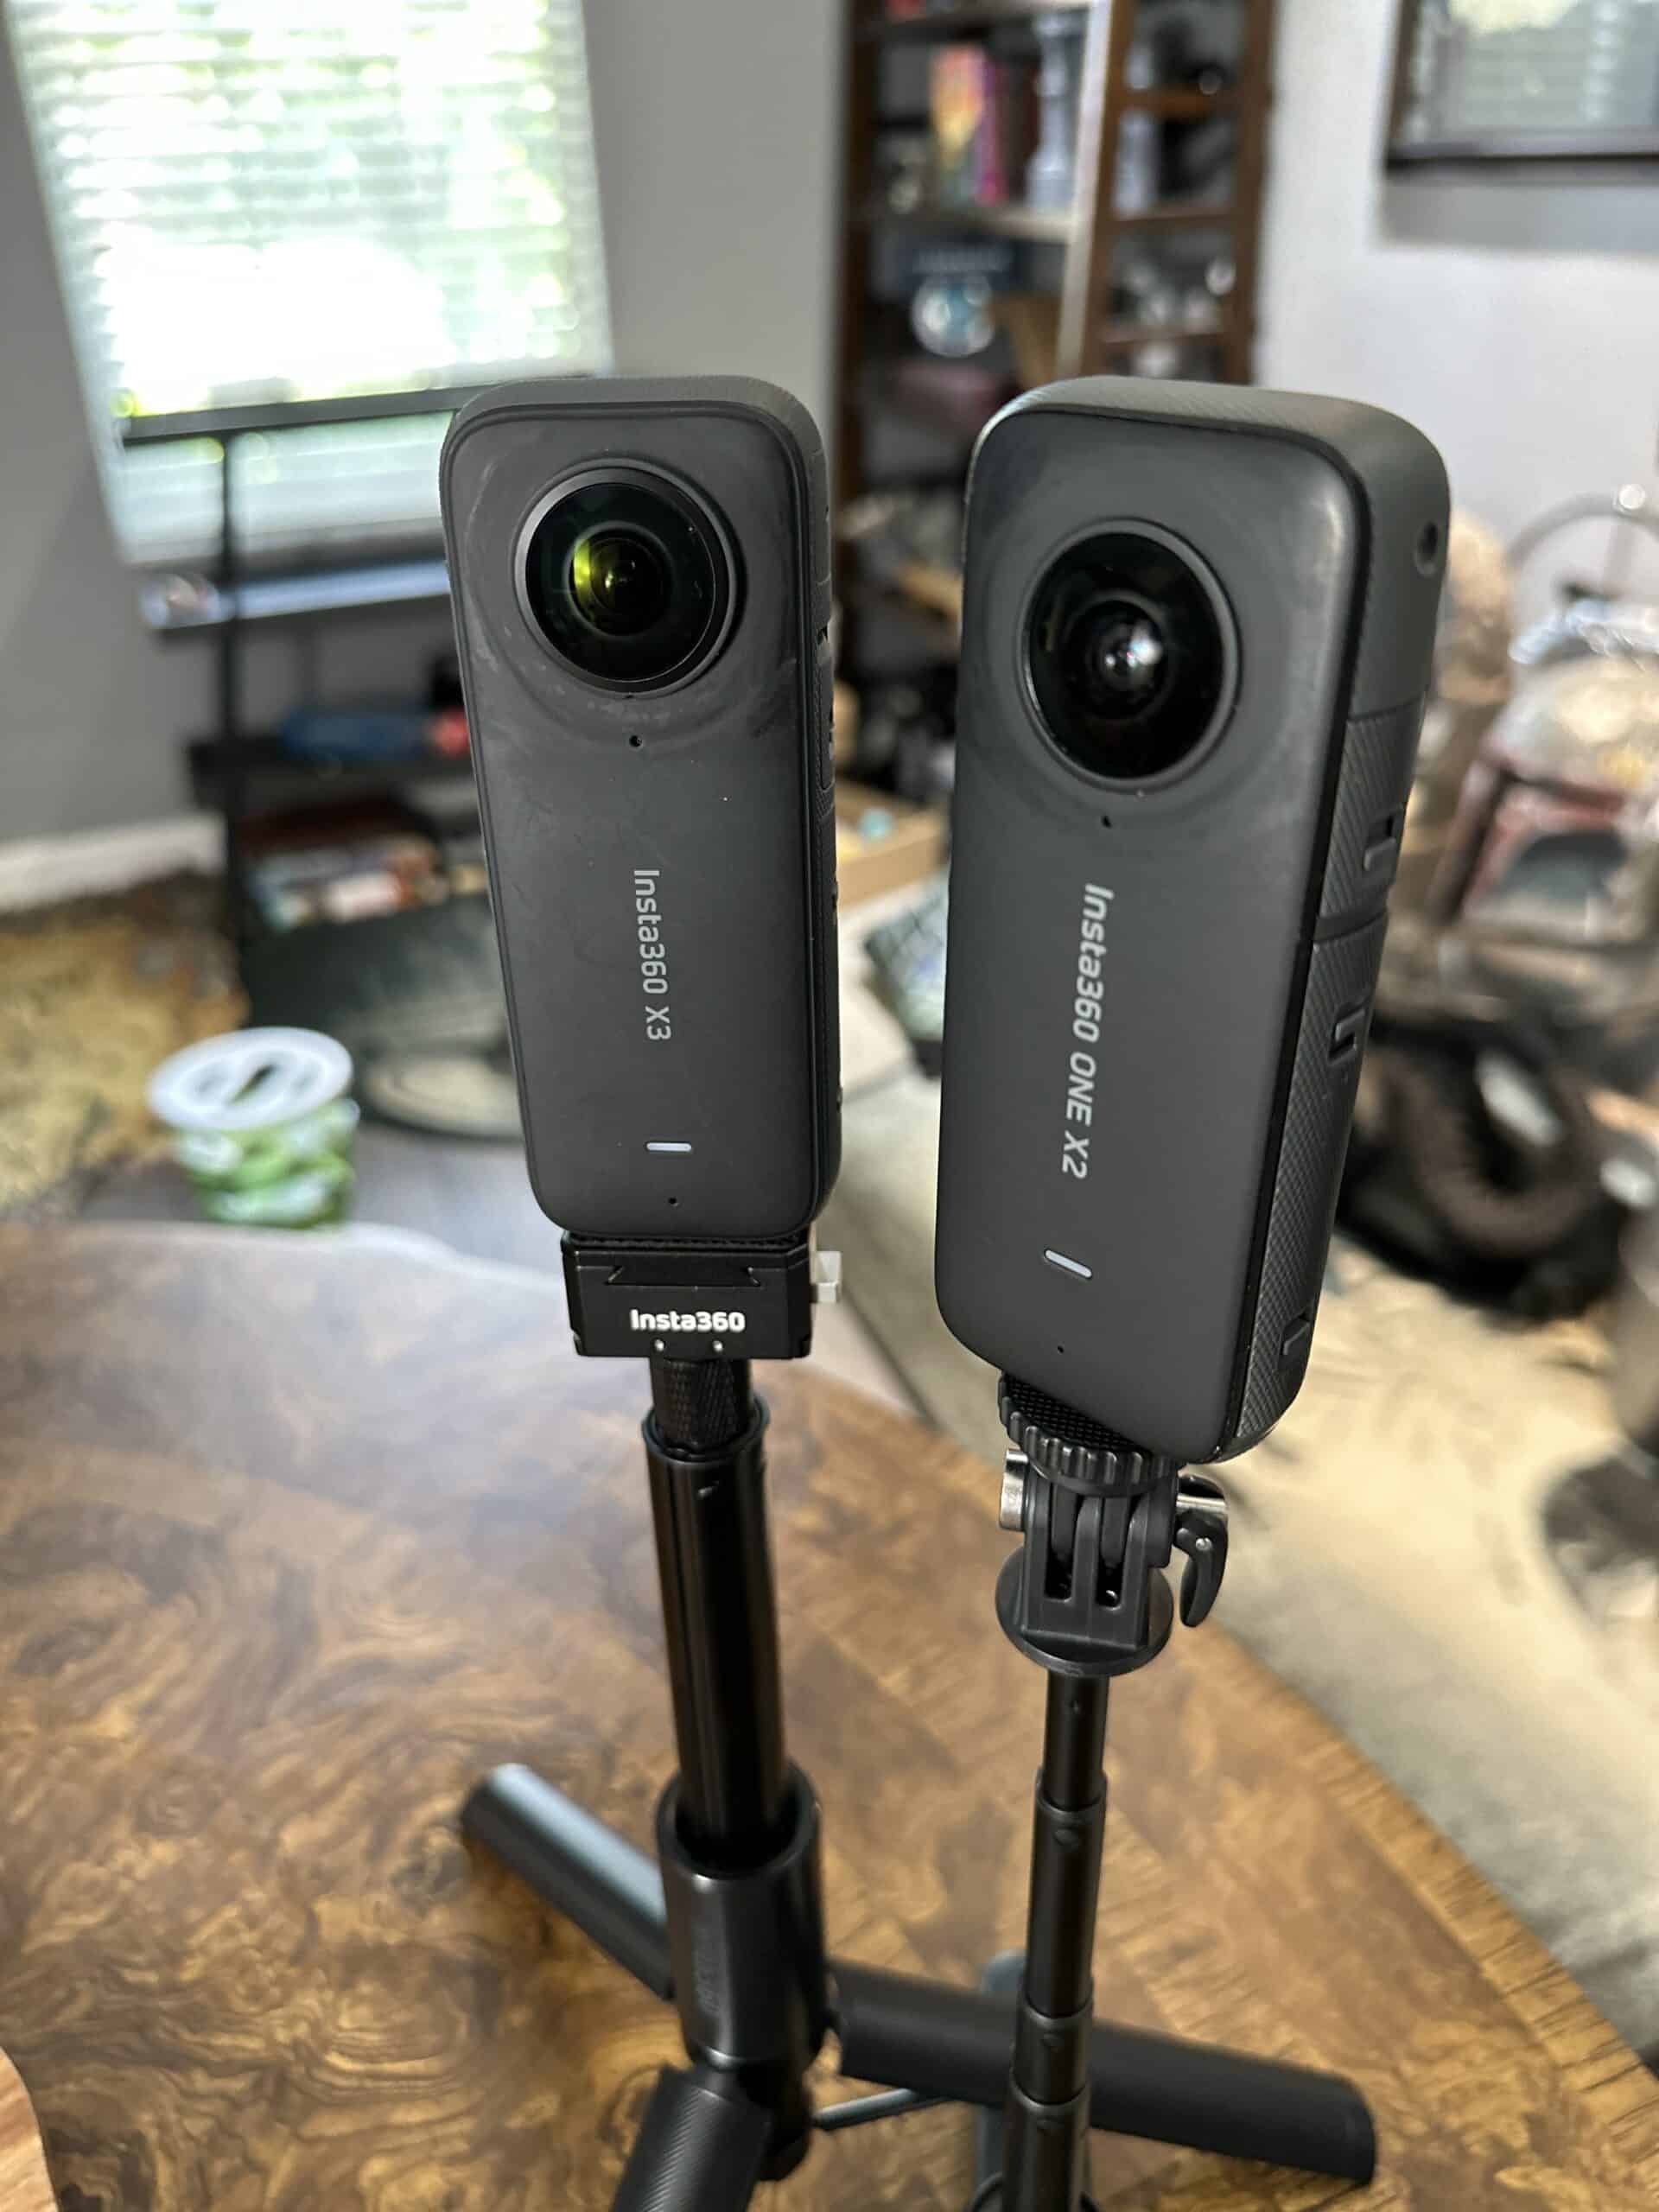 Insta360 X2 and X3 on selfie stick and tripod back view